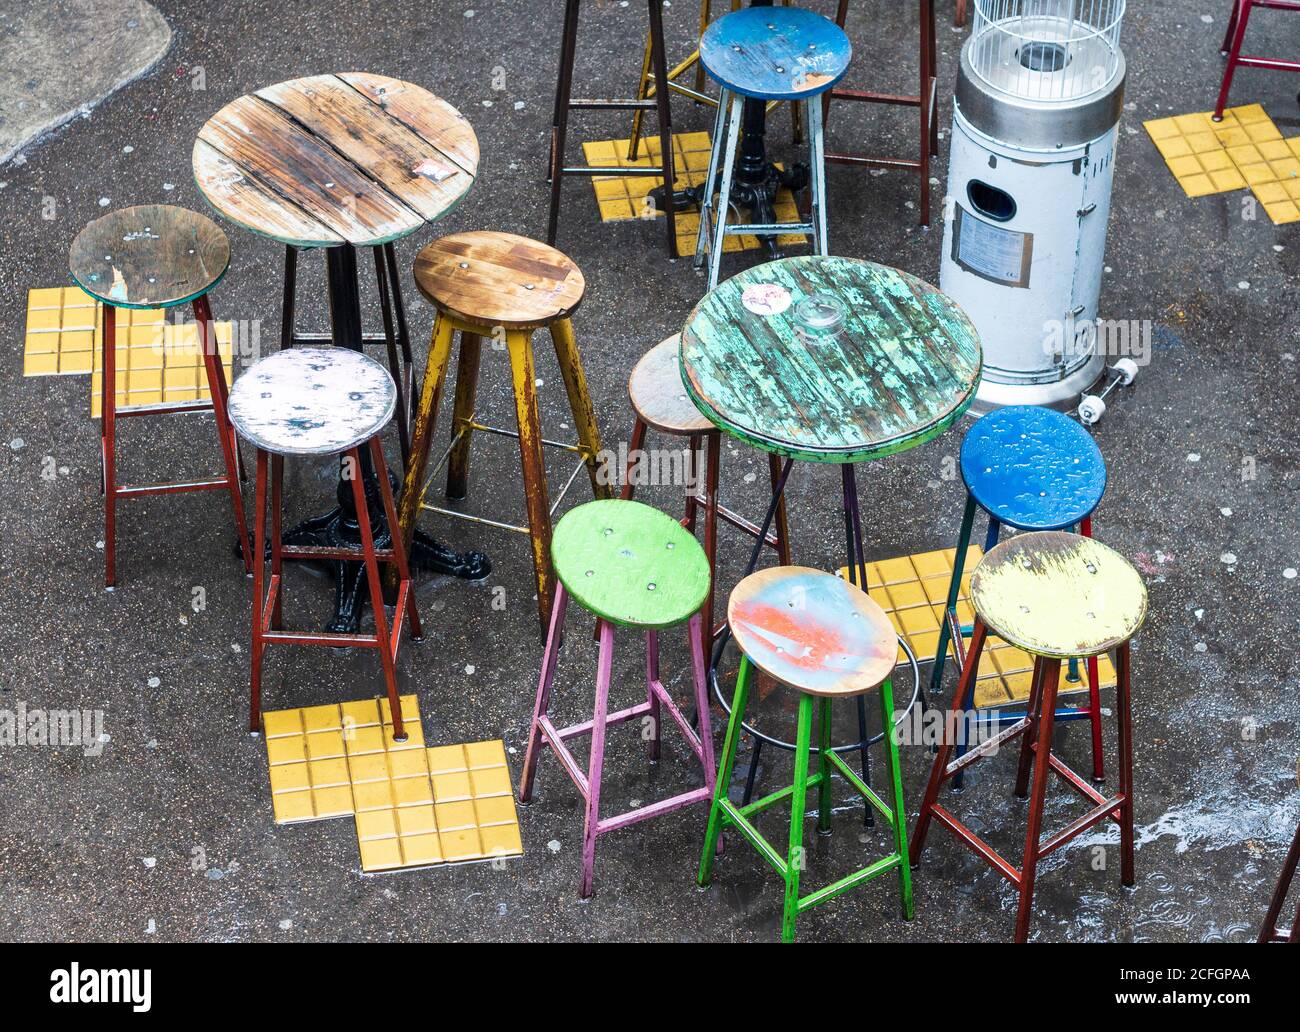 Szimpla Kertmoz bar stools in colour: Colourfully painted stools form part of the eclectic furnishings of the famous ruin bar Szimpla Kertmoz. Stock Photo